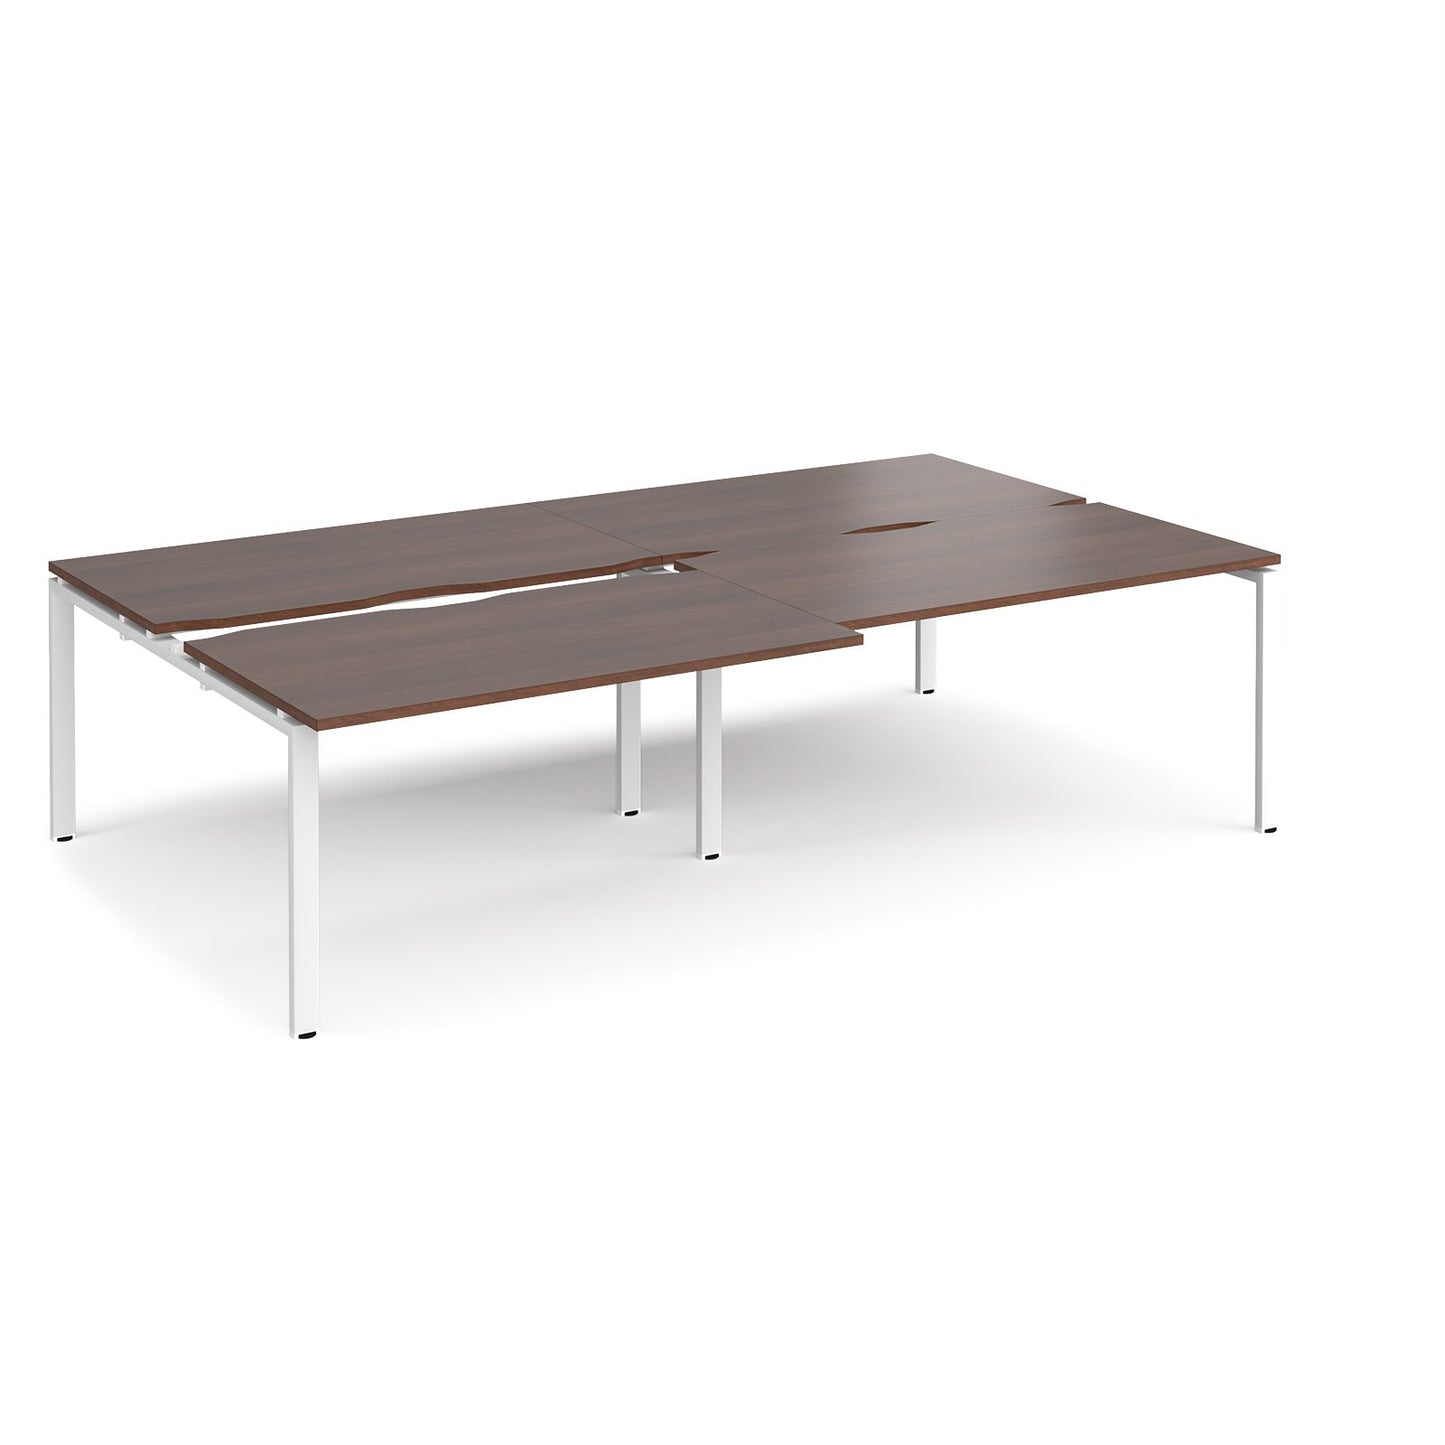 4 Persons - Adapt SLIDING top double back to back desks 1200mm deep